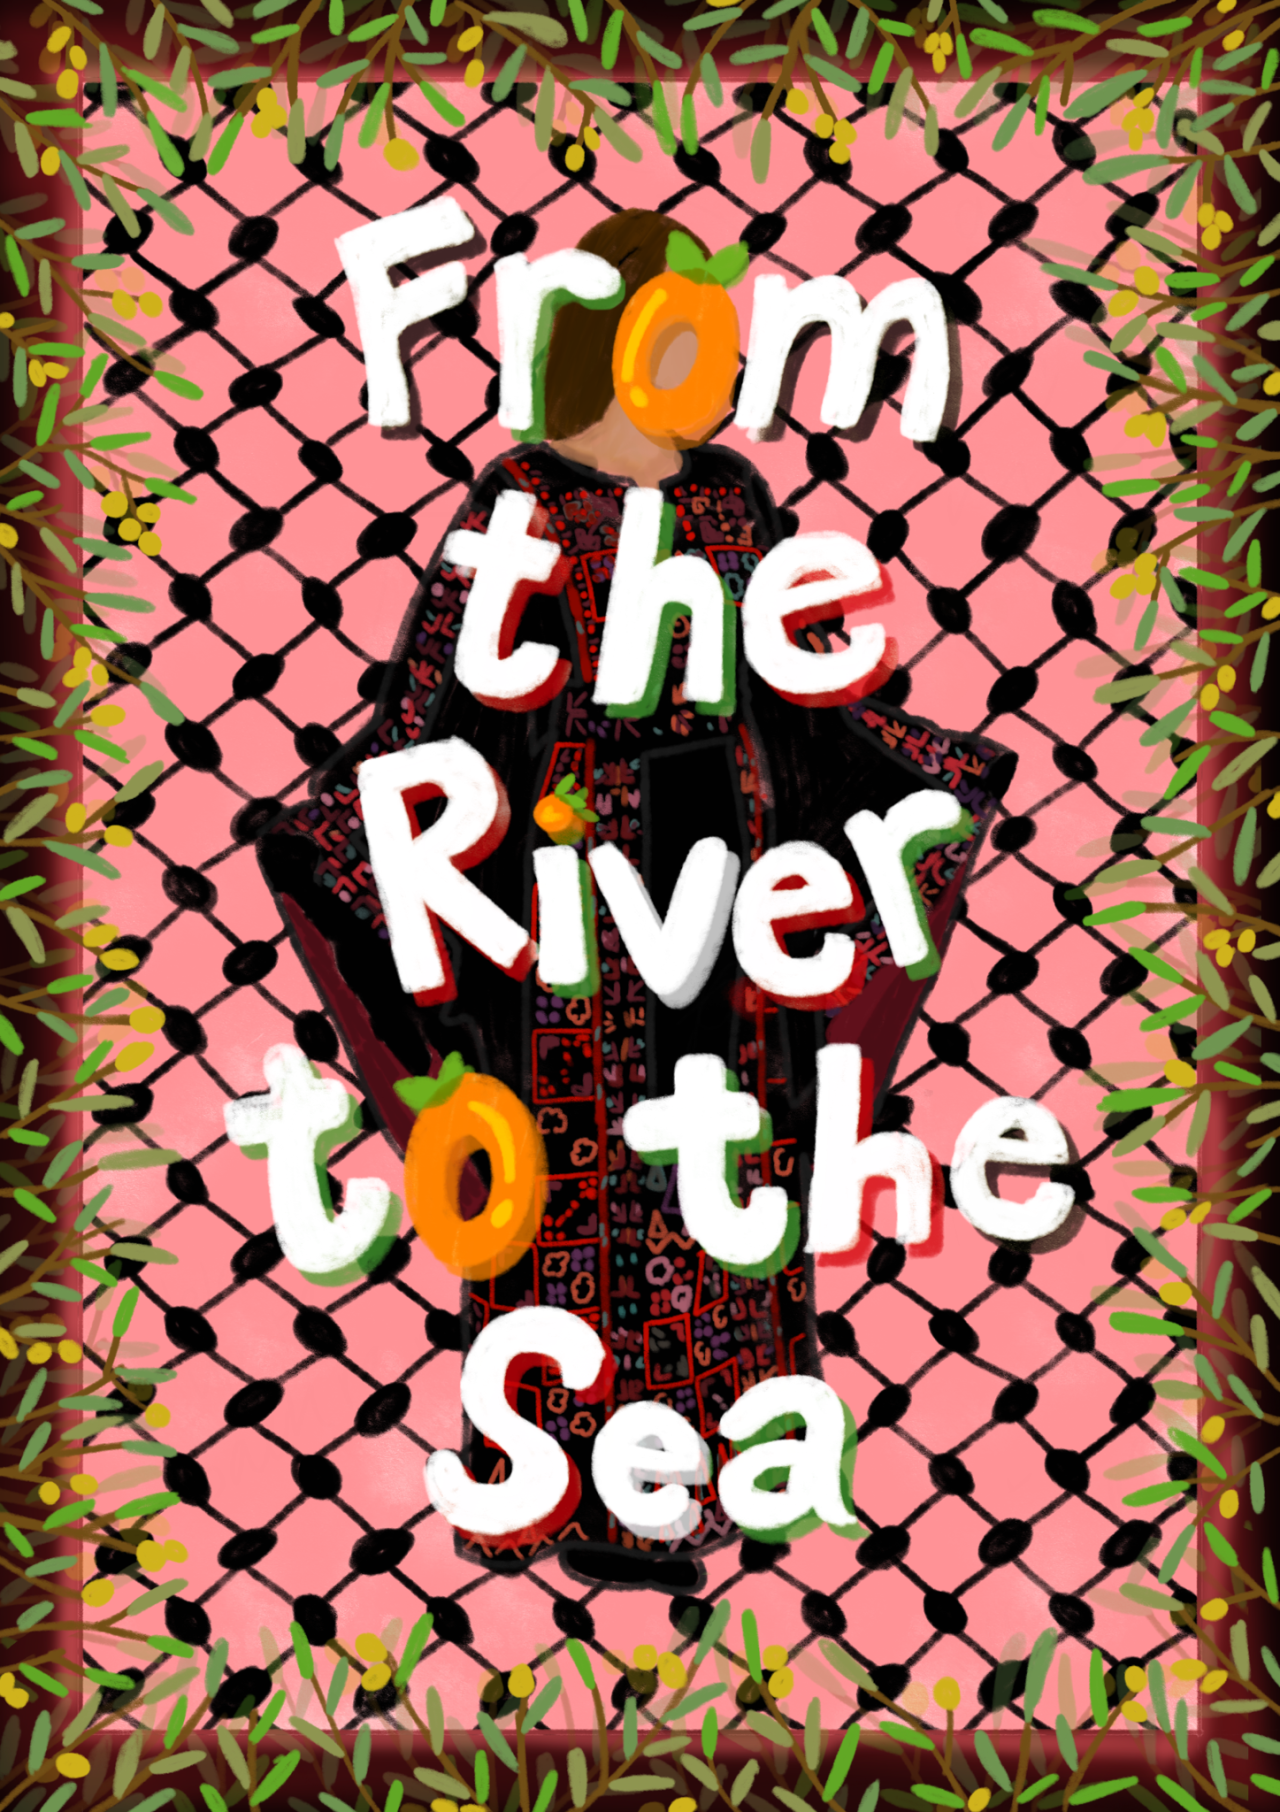 A digital drawing that says "From the River to the Sea" in large white letters, with the colours red, green, white, and black shading various letters. The letter "O" and the dot on the "i" are coloured orange to resemble the orange fruit. The text is overlayed over a Palestinian woman wearing a traditional black thobe with colourful red embroidery. The background is light red and is patterned with the fishnet pattern of the Palestinian kufiya. Upon the black and red border are olive branches bearing fruit.